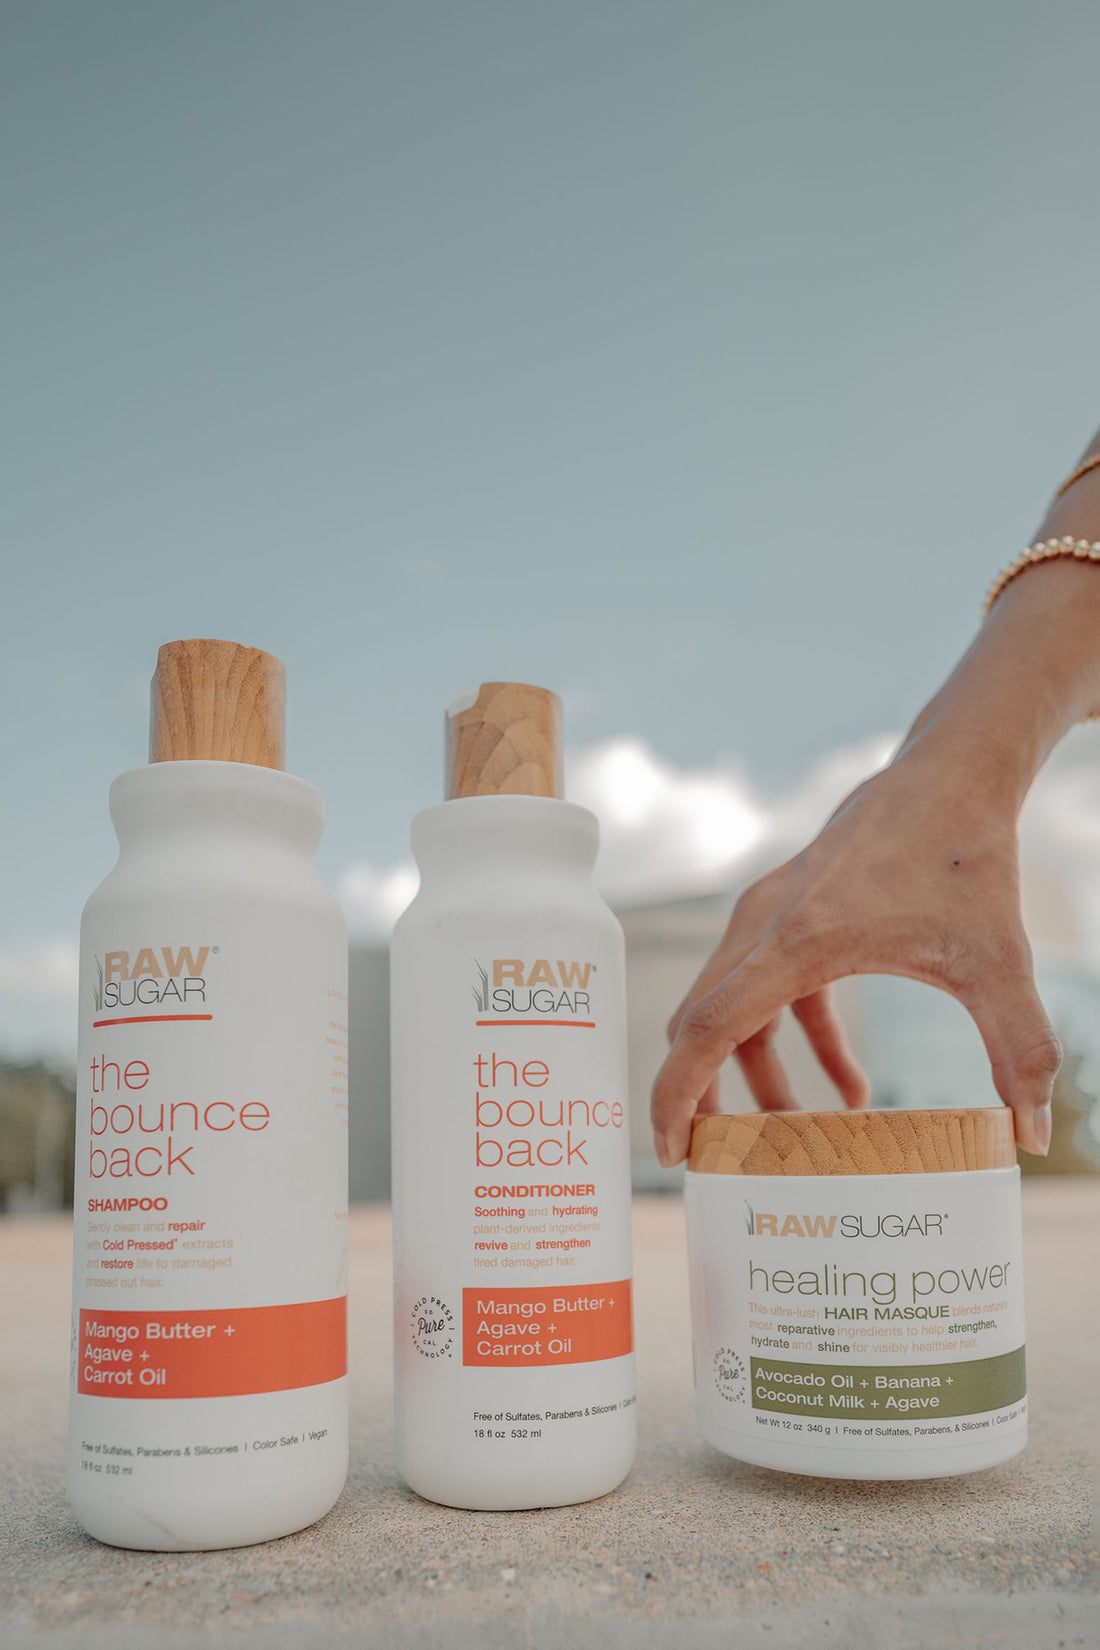 Bounce back products and healing power hair masque jar